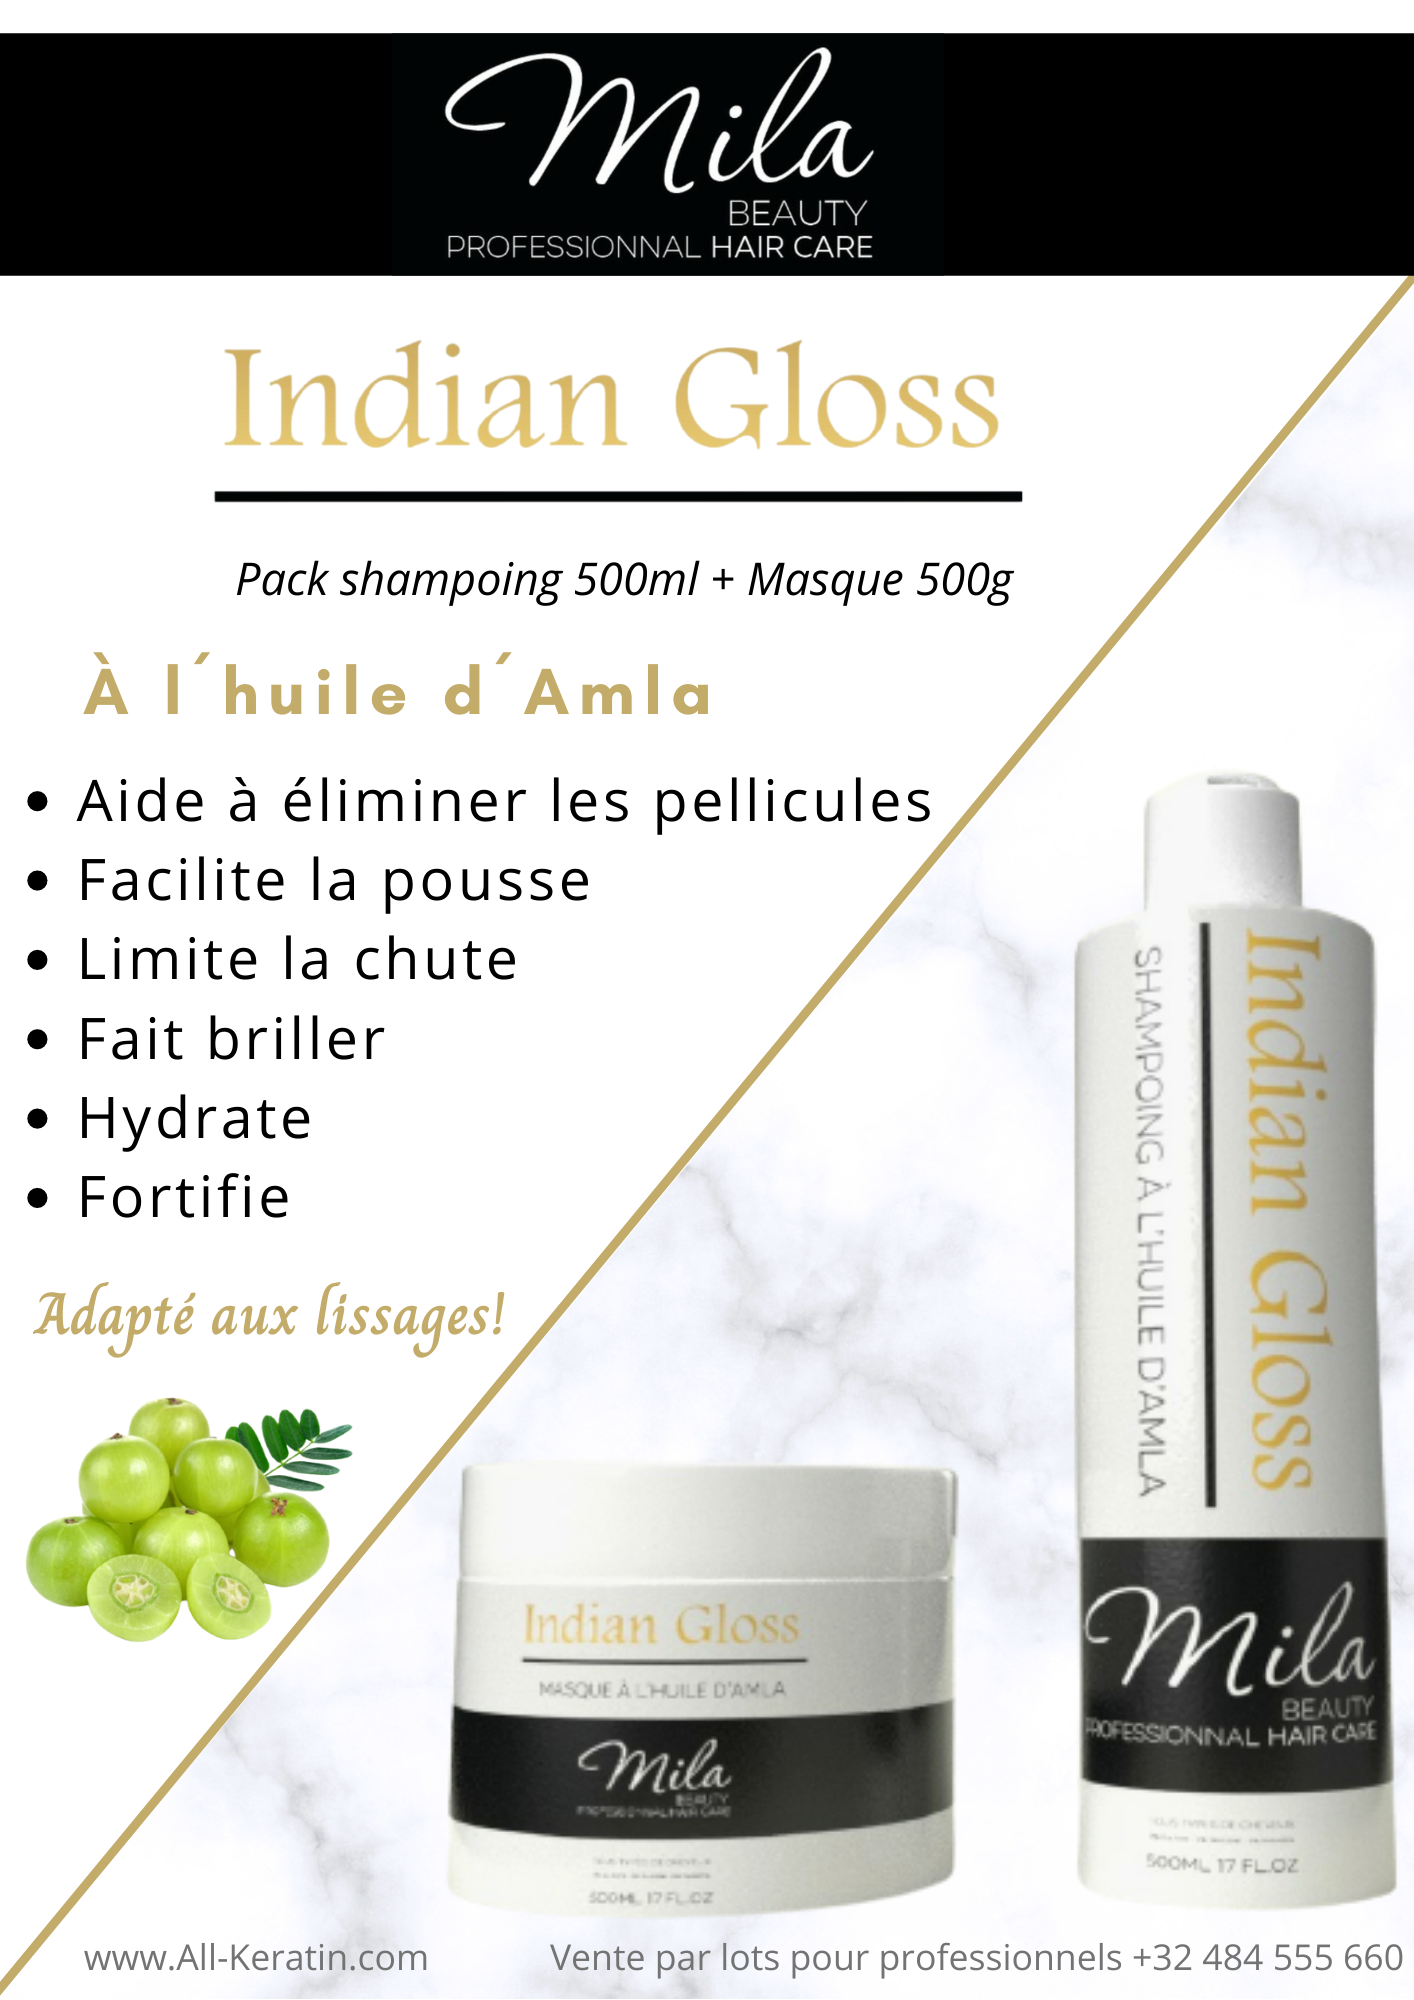 Lot 10 x duo Indian Gloss à l'huile d'Amla - Shampoing 500ml et masque 500g  - All-k Beauty